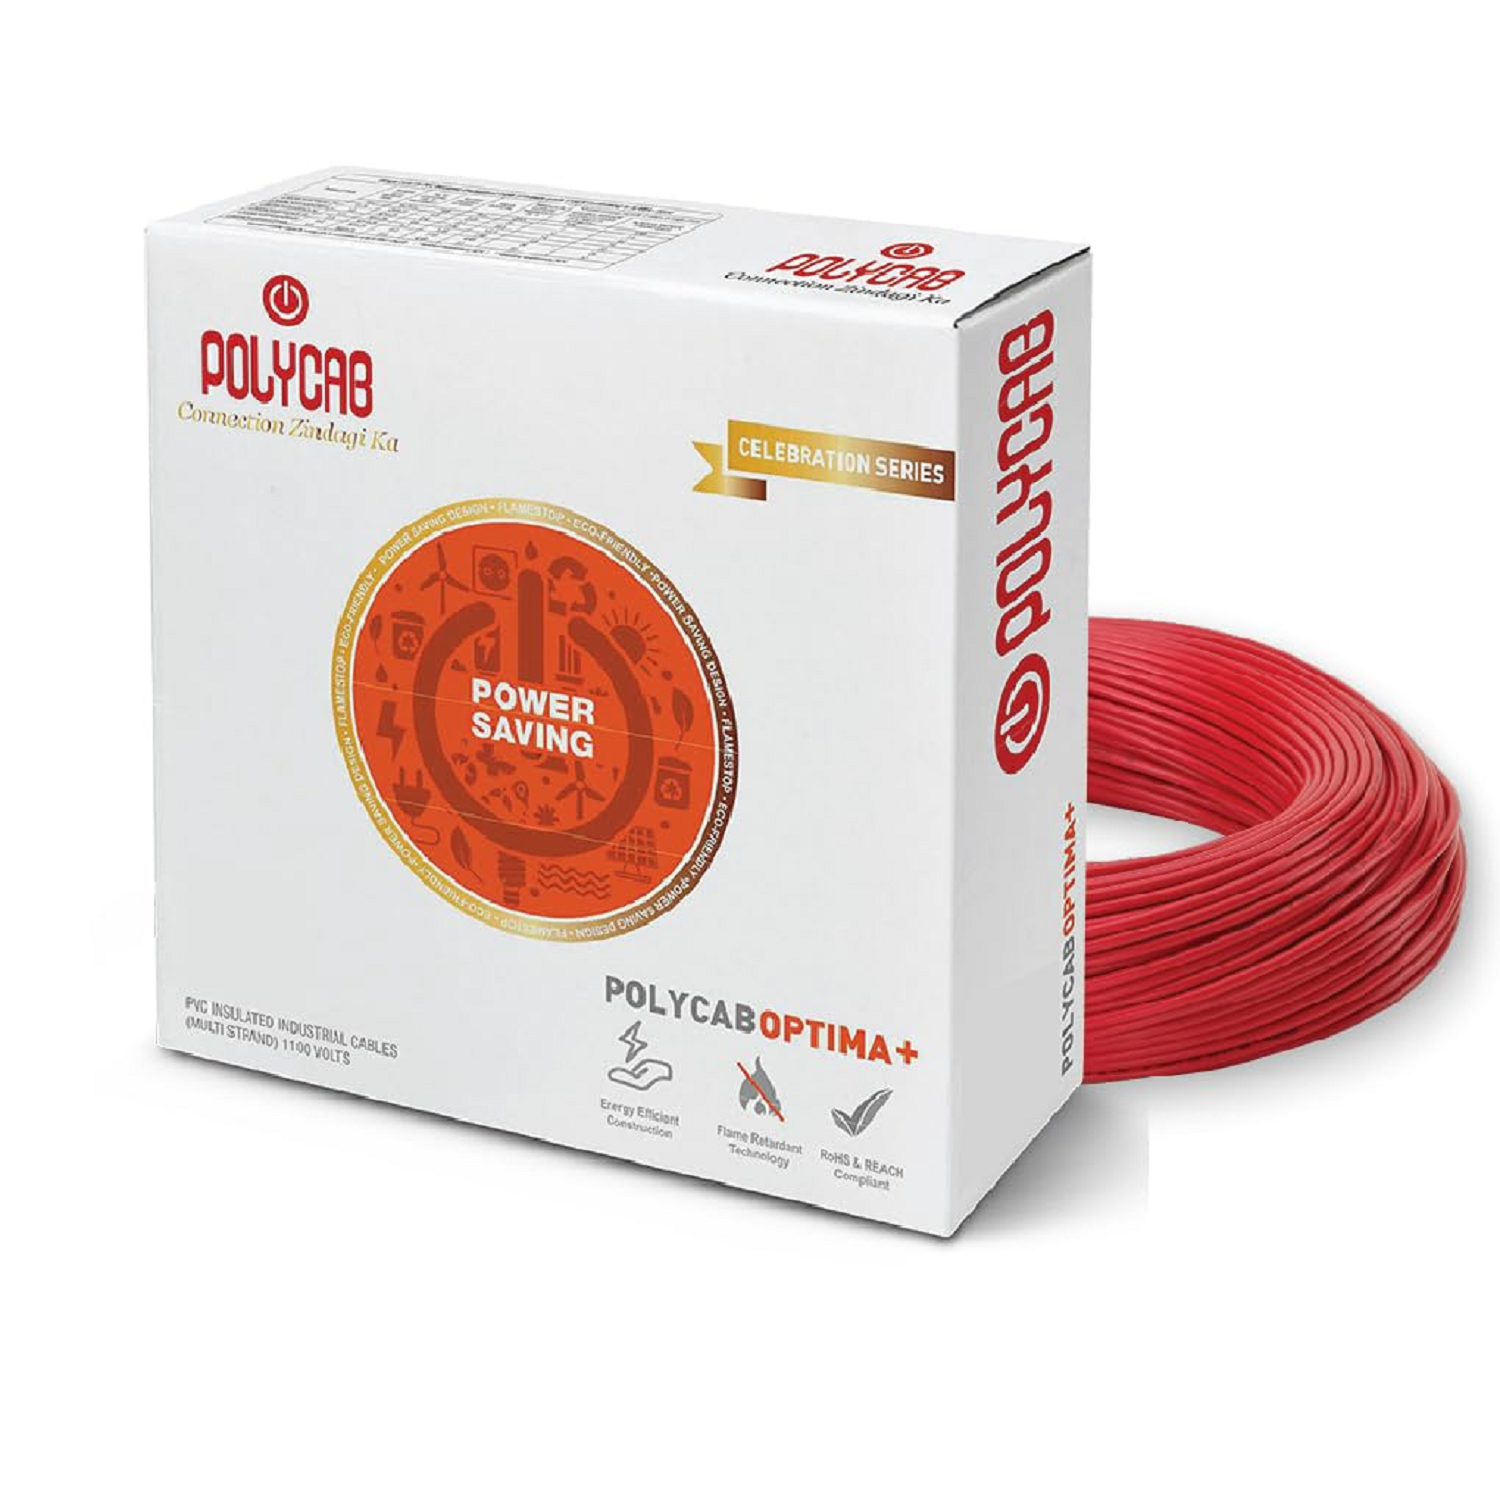 Polycab Optima Plus FR-LF 6.0 SQ-MM, 90 Meters PVC Insulated Copper Wire Single Core (Red)